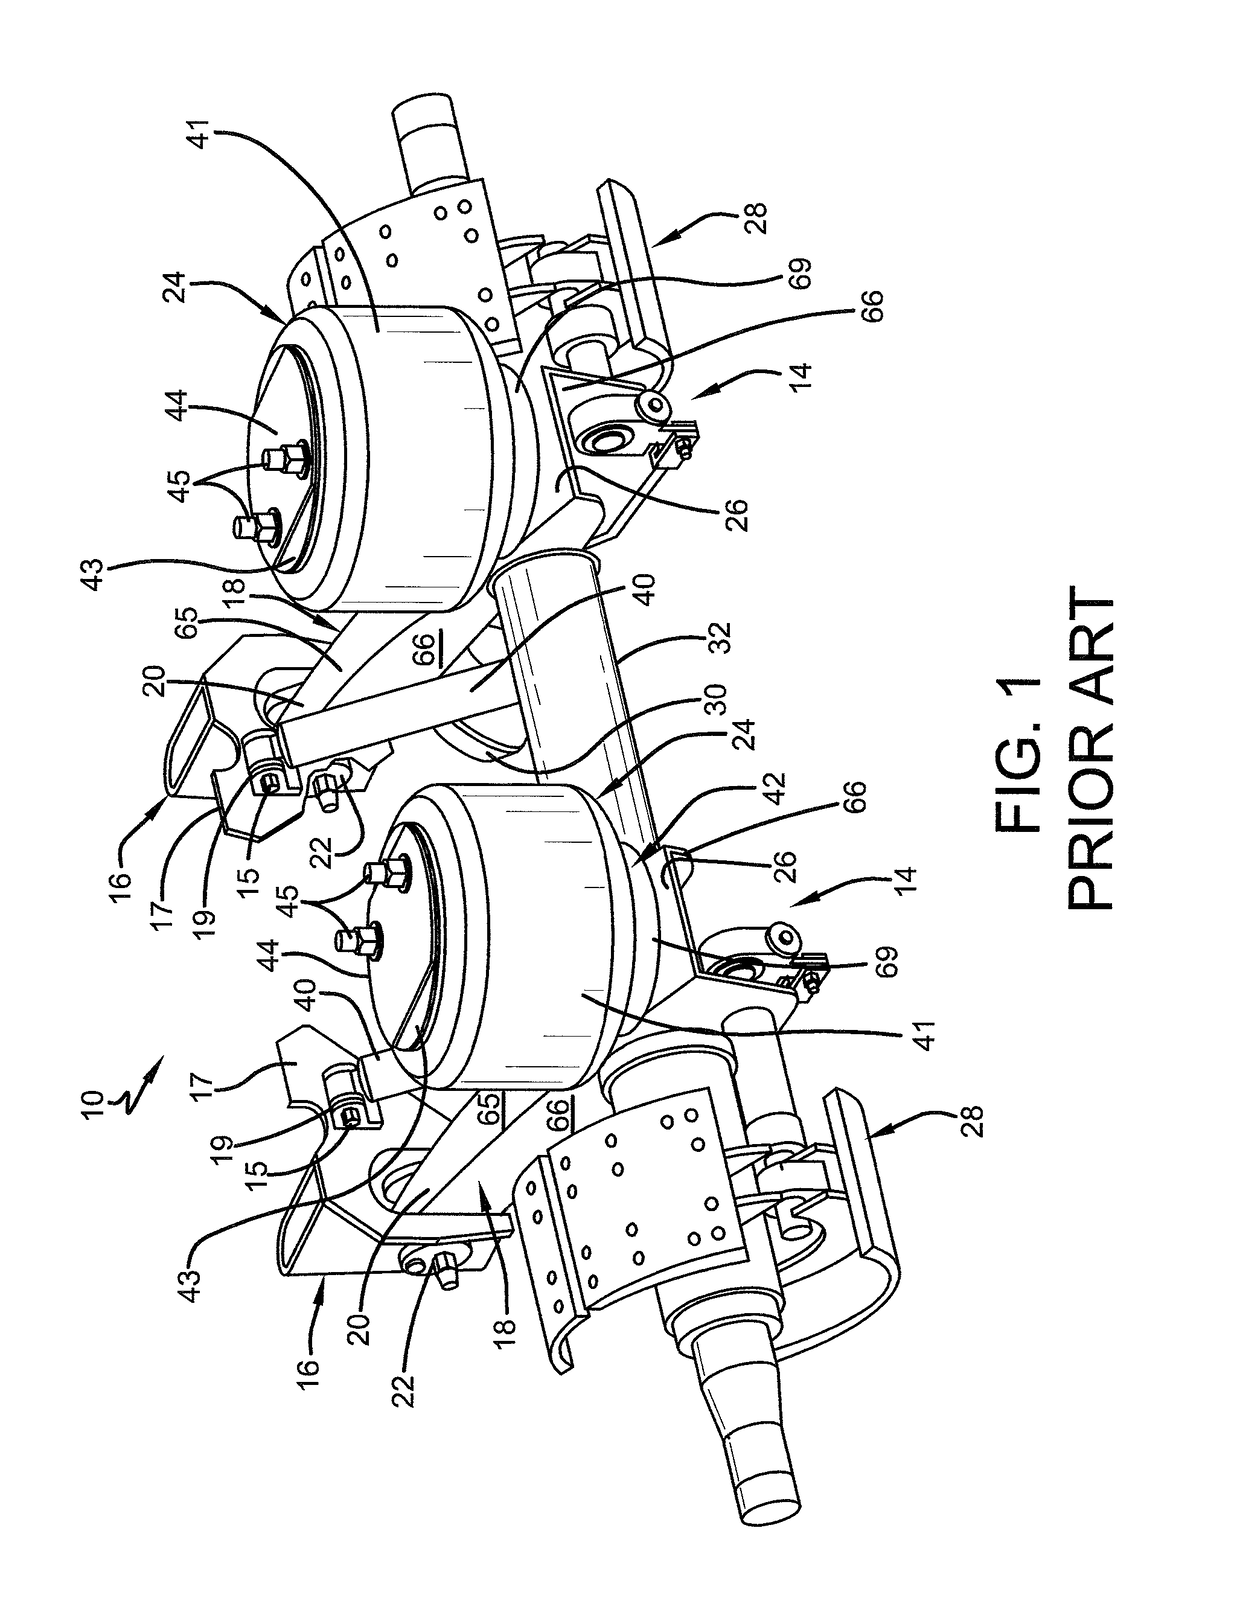 Air spring with damping characteristics for heavy-duty vehicles